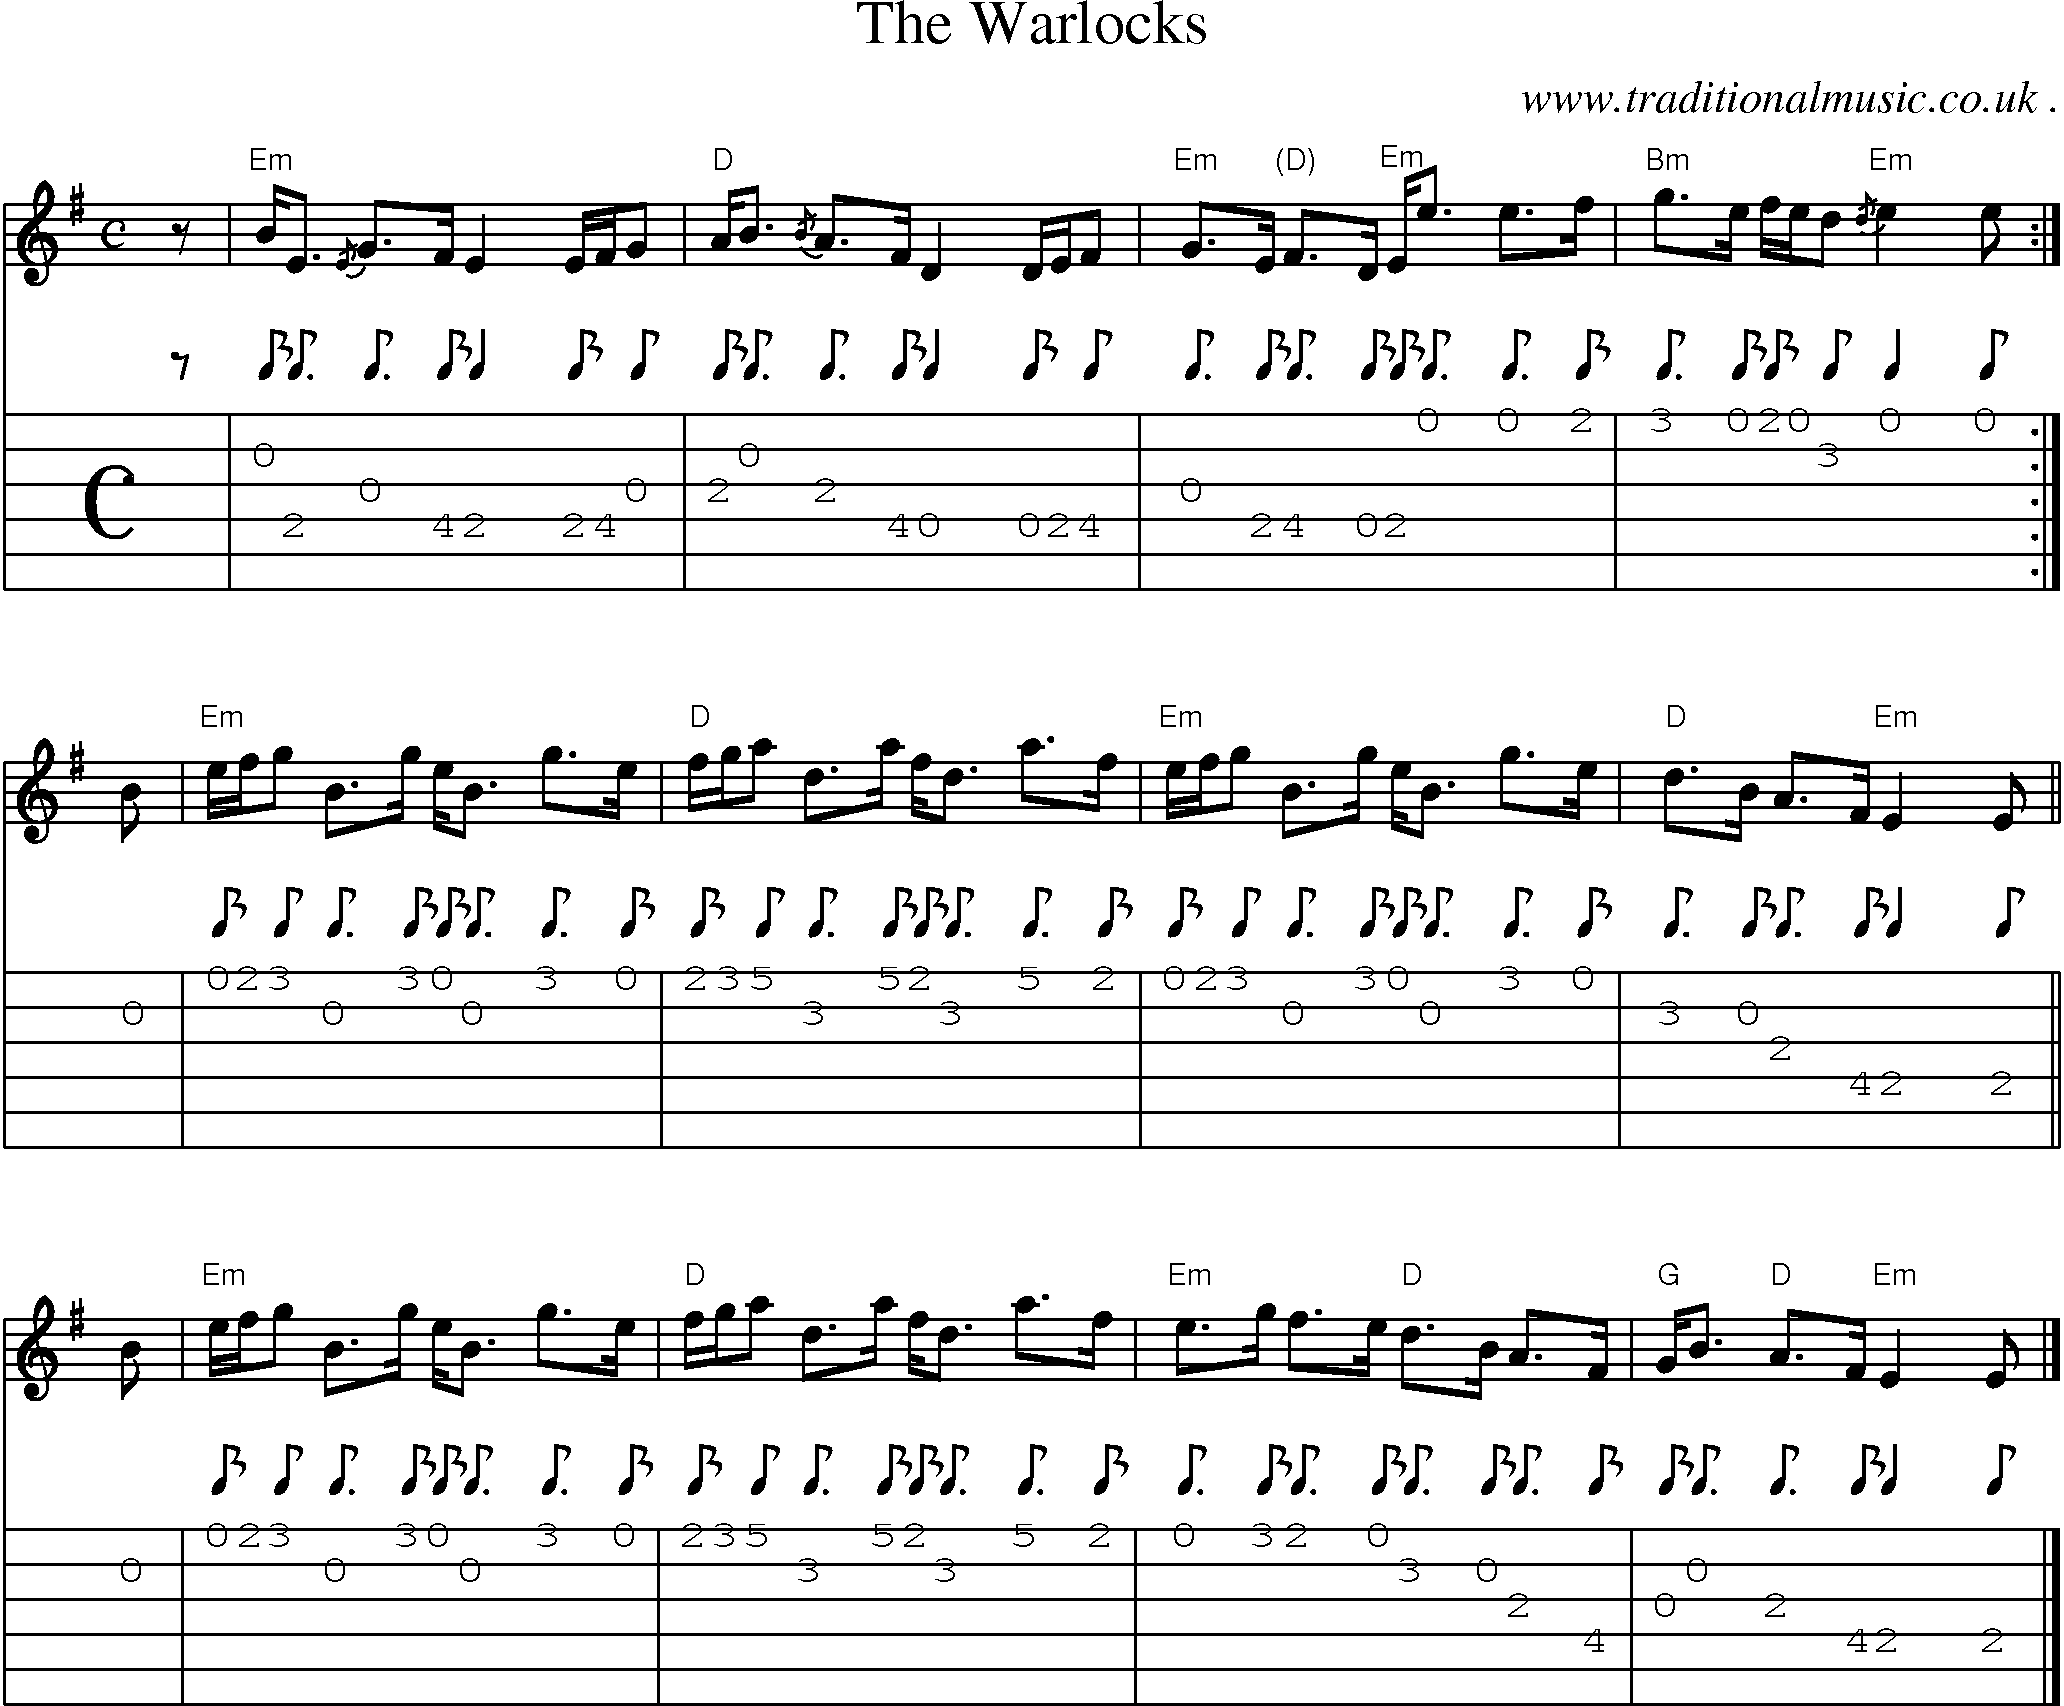 Sheet-music  score, Chords and Guitar Tabs for The Warlocks